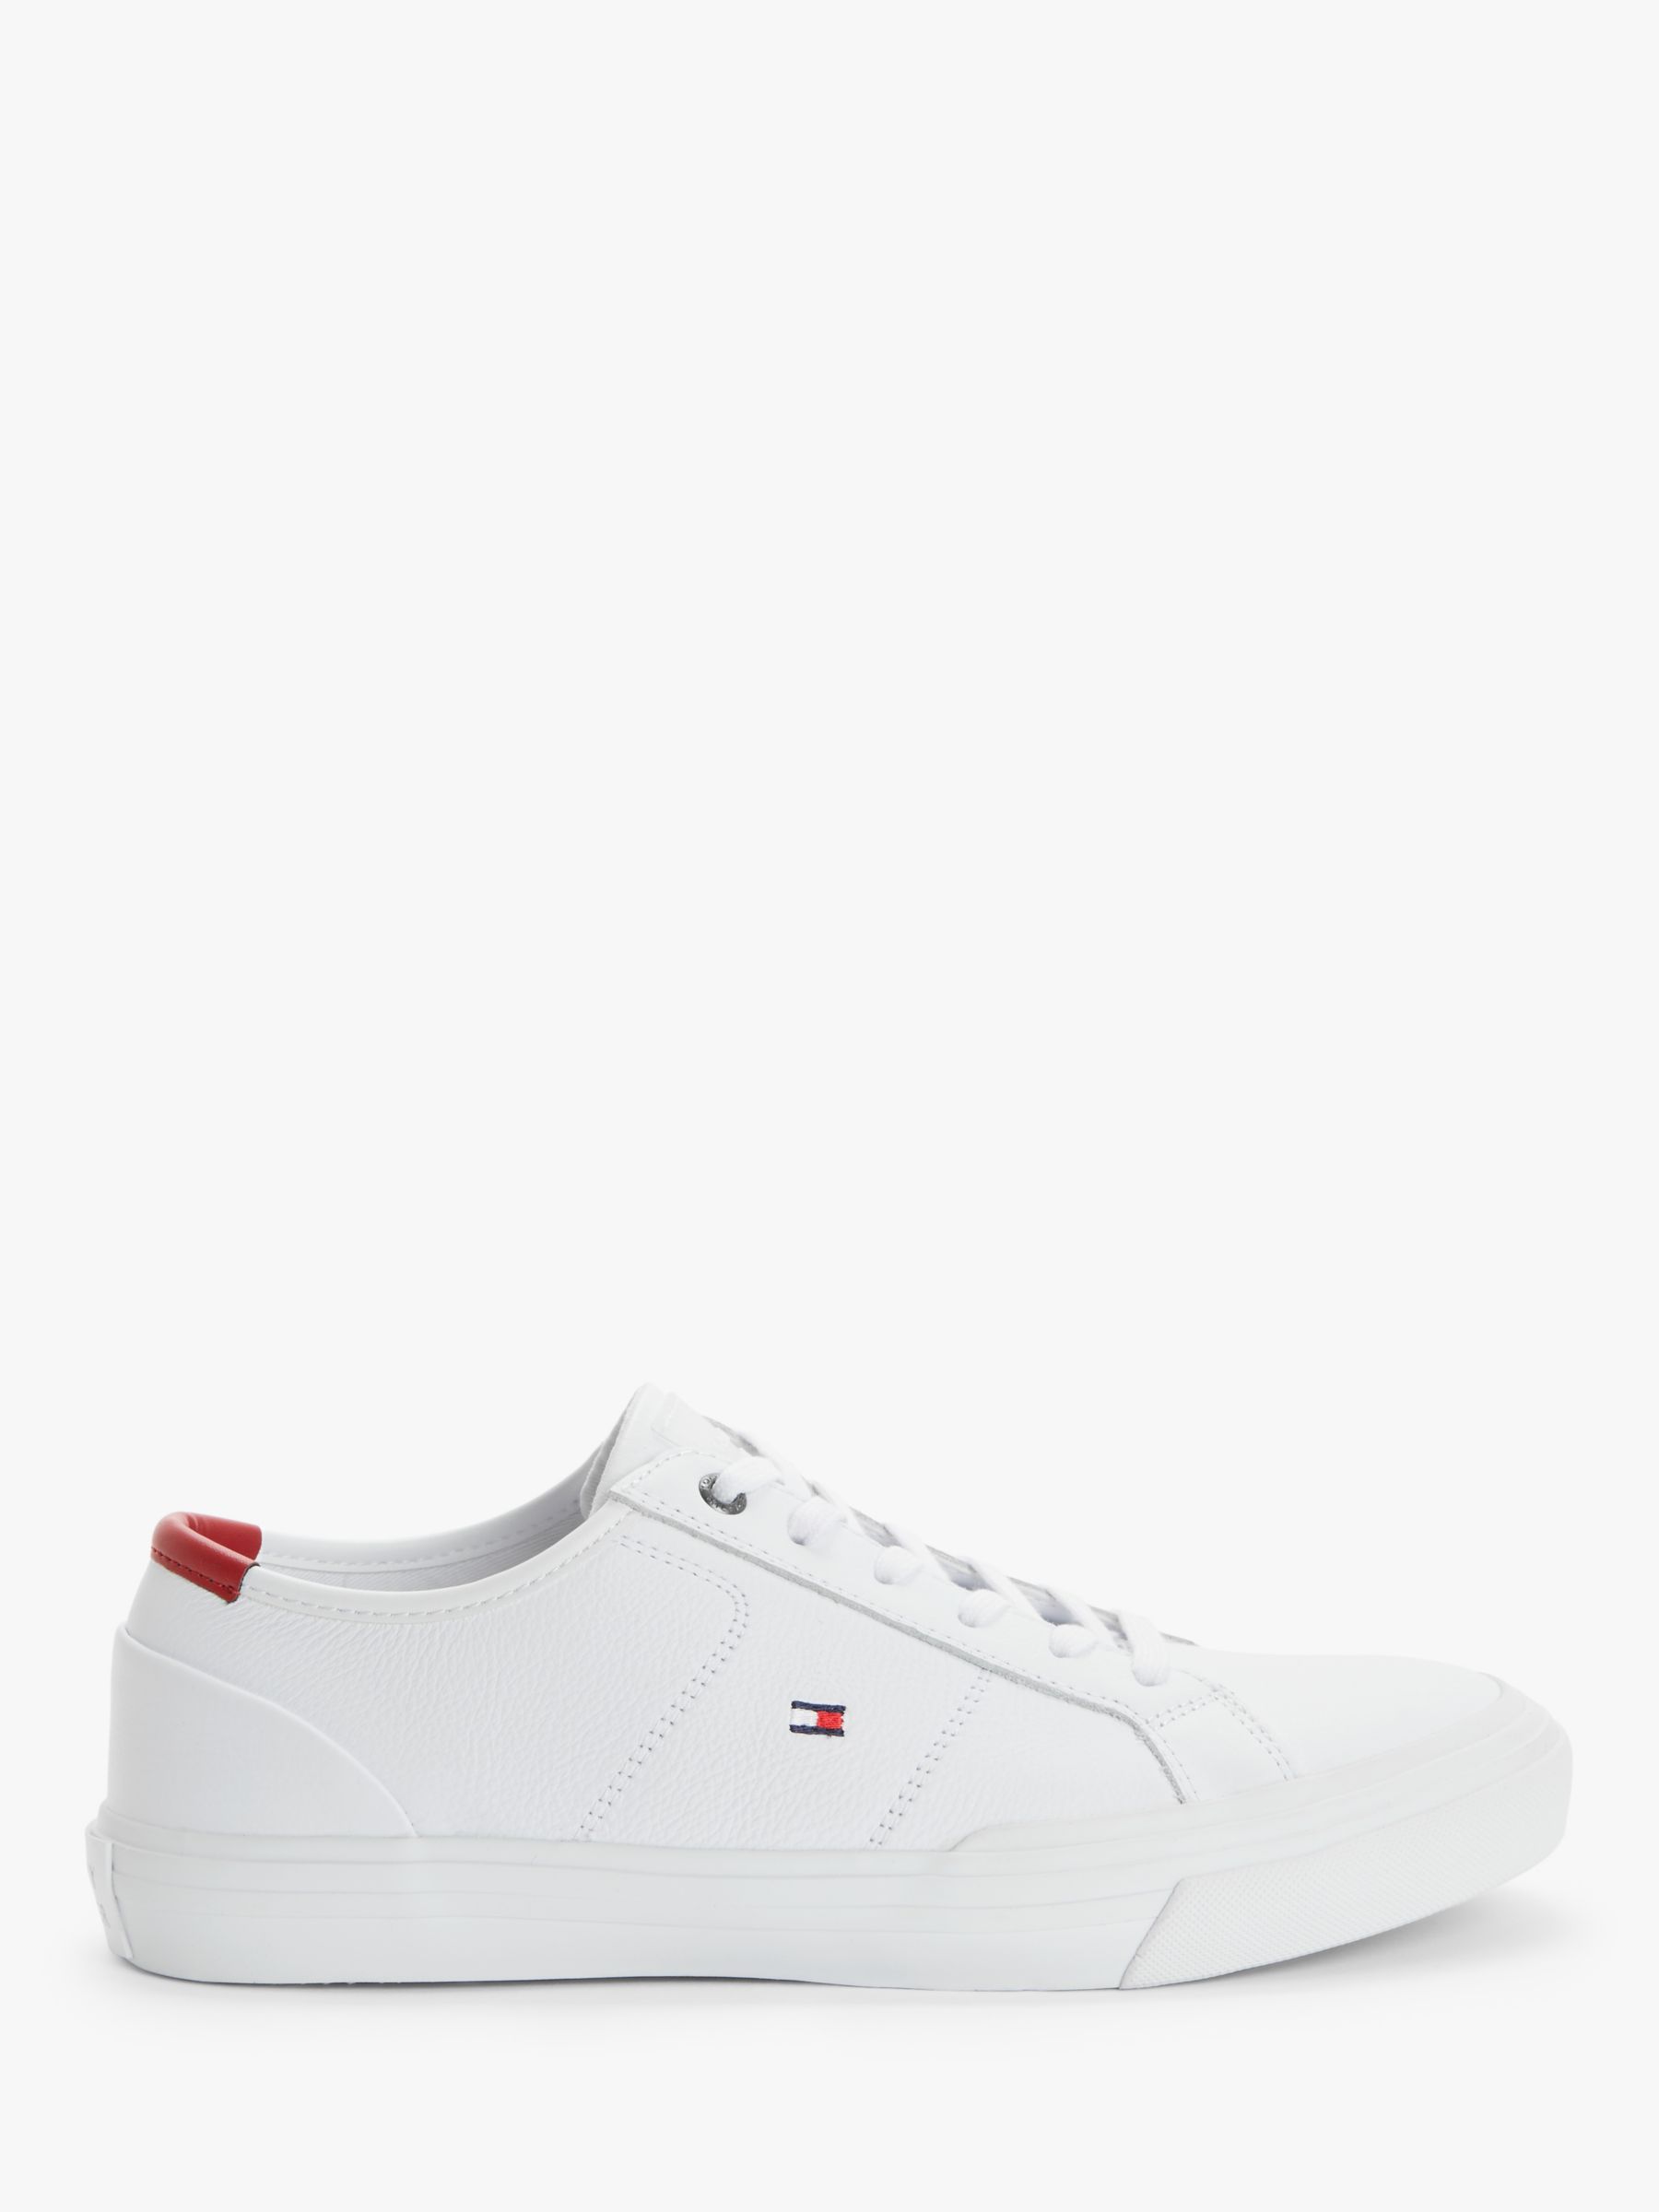 Tommy Hilfiger Core Signature Leather Trainers at John Lewis & Partners